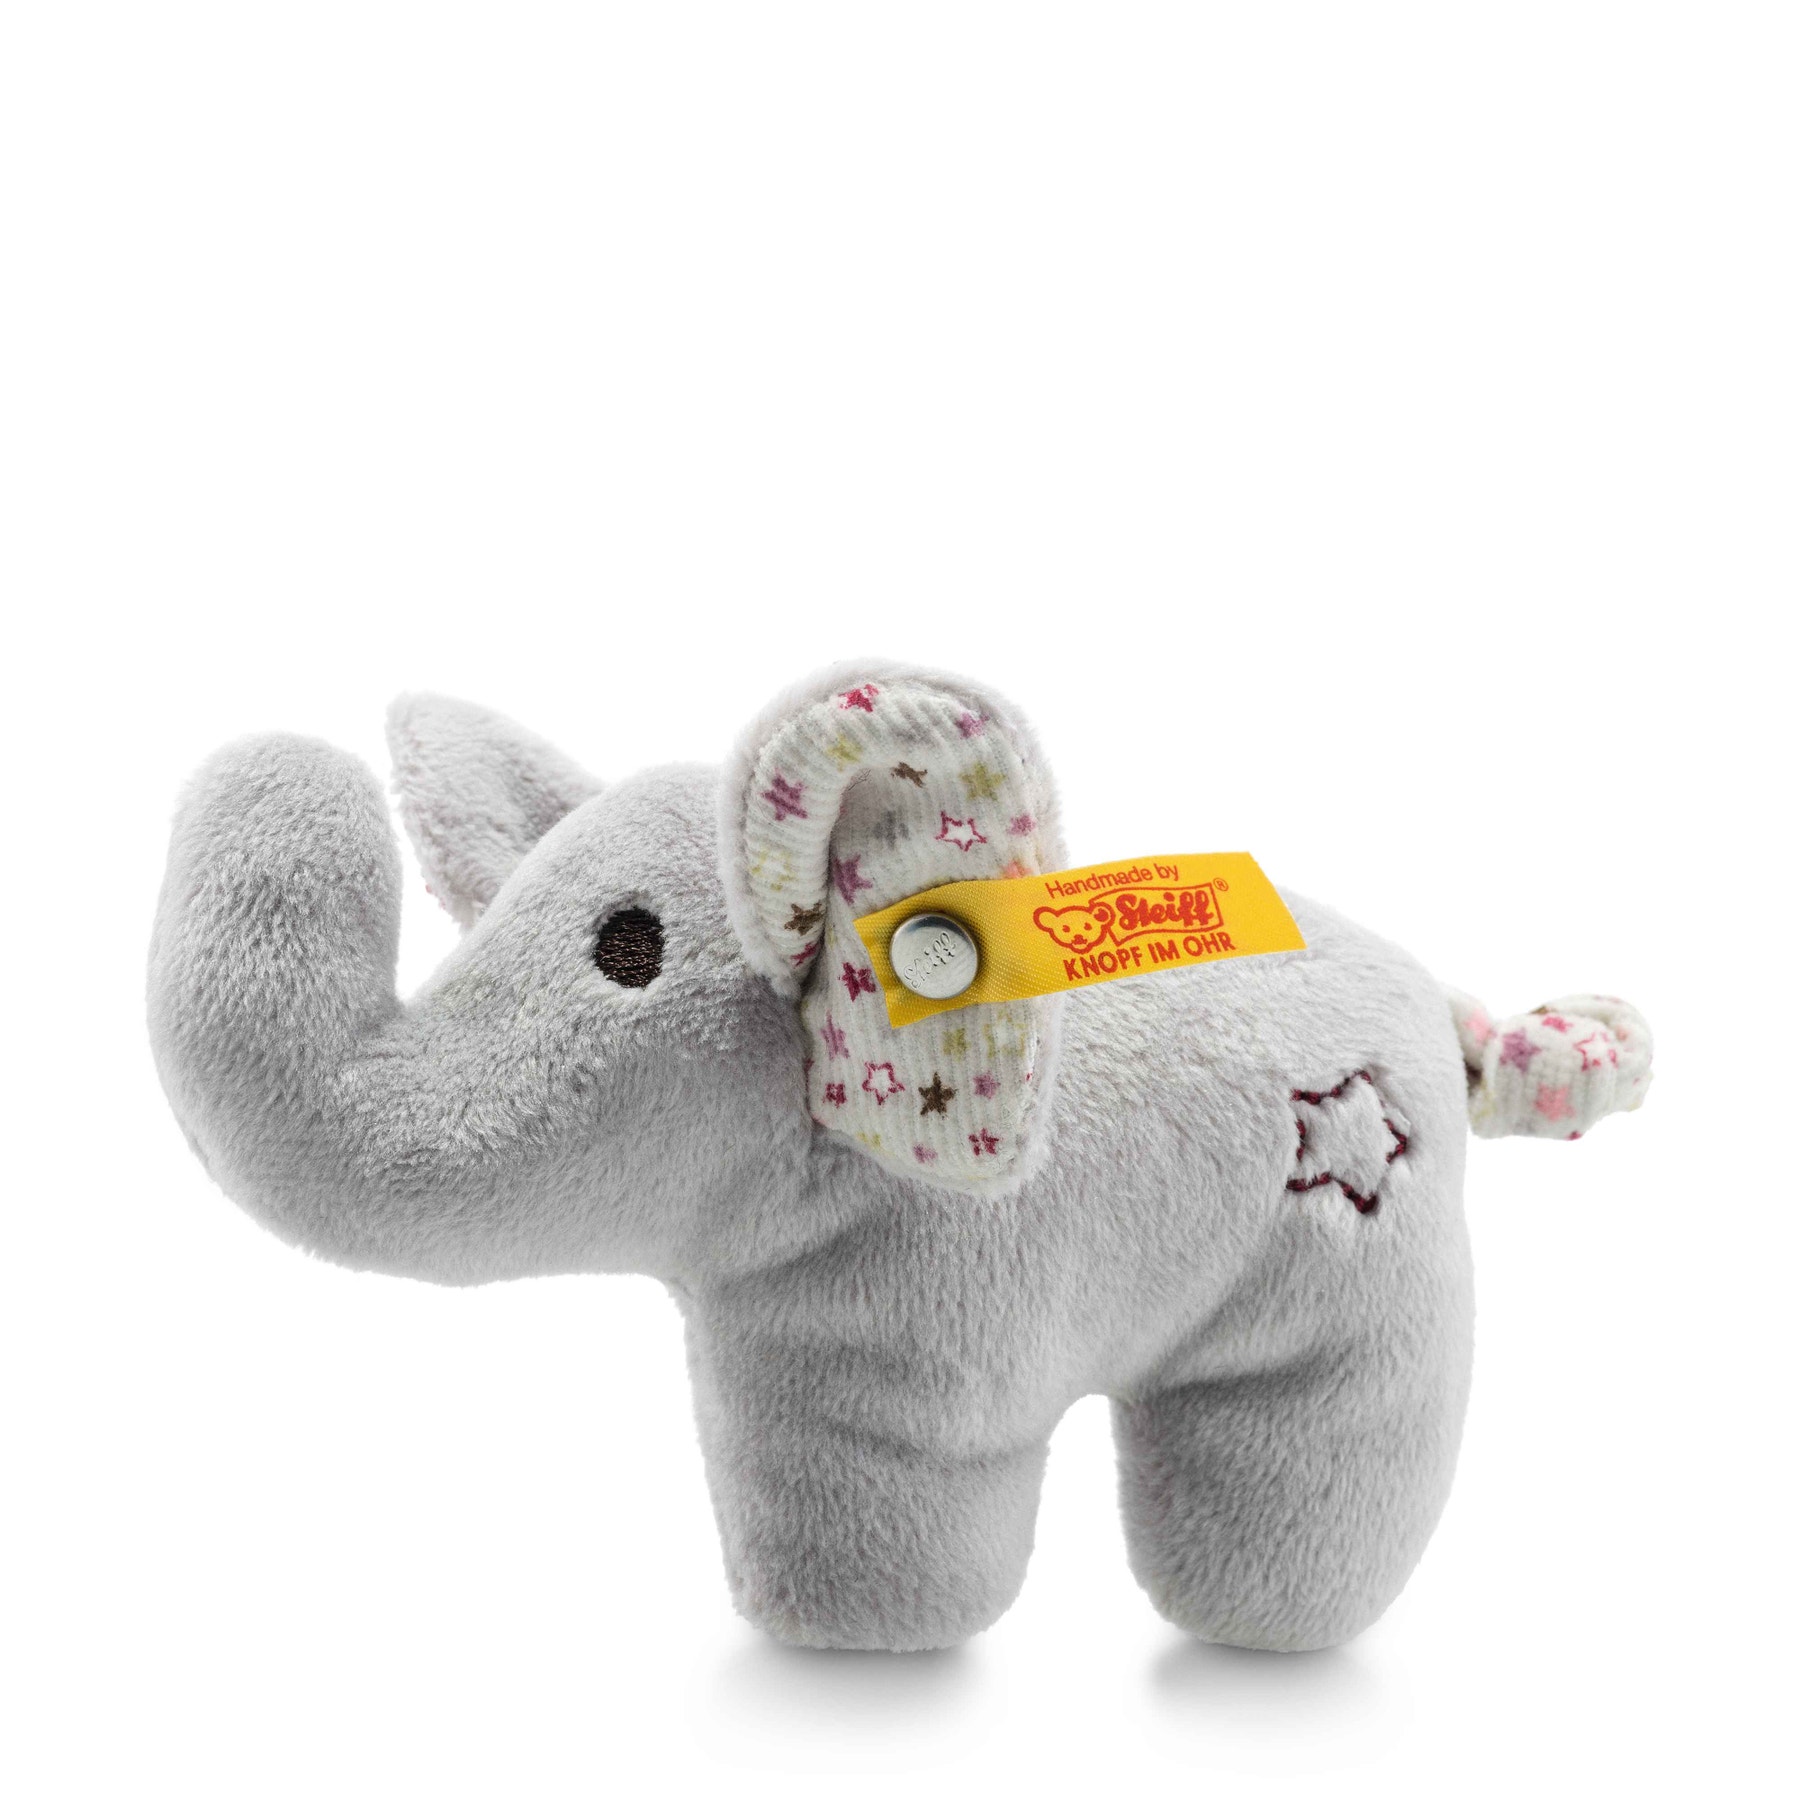 Mini elephant with rustling foil and rattle